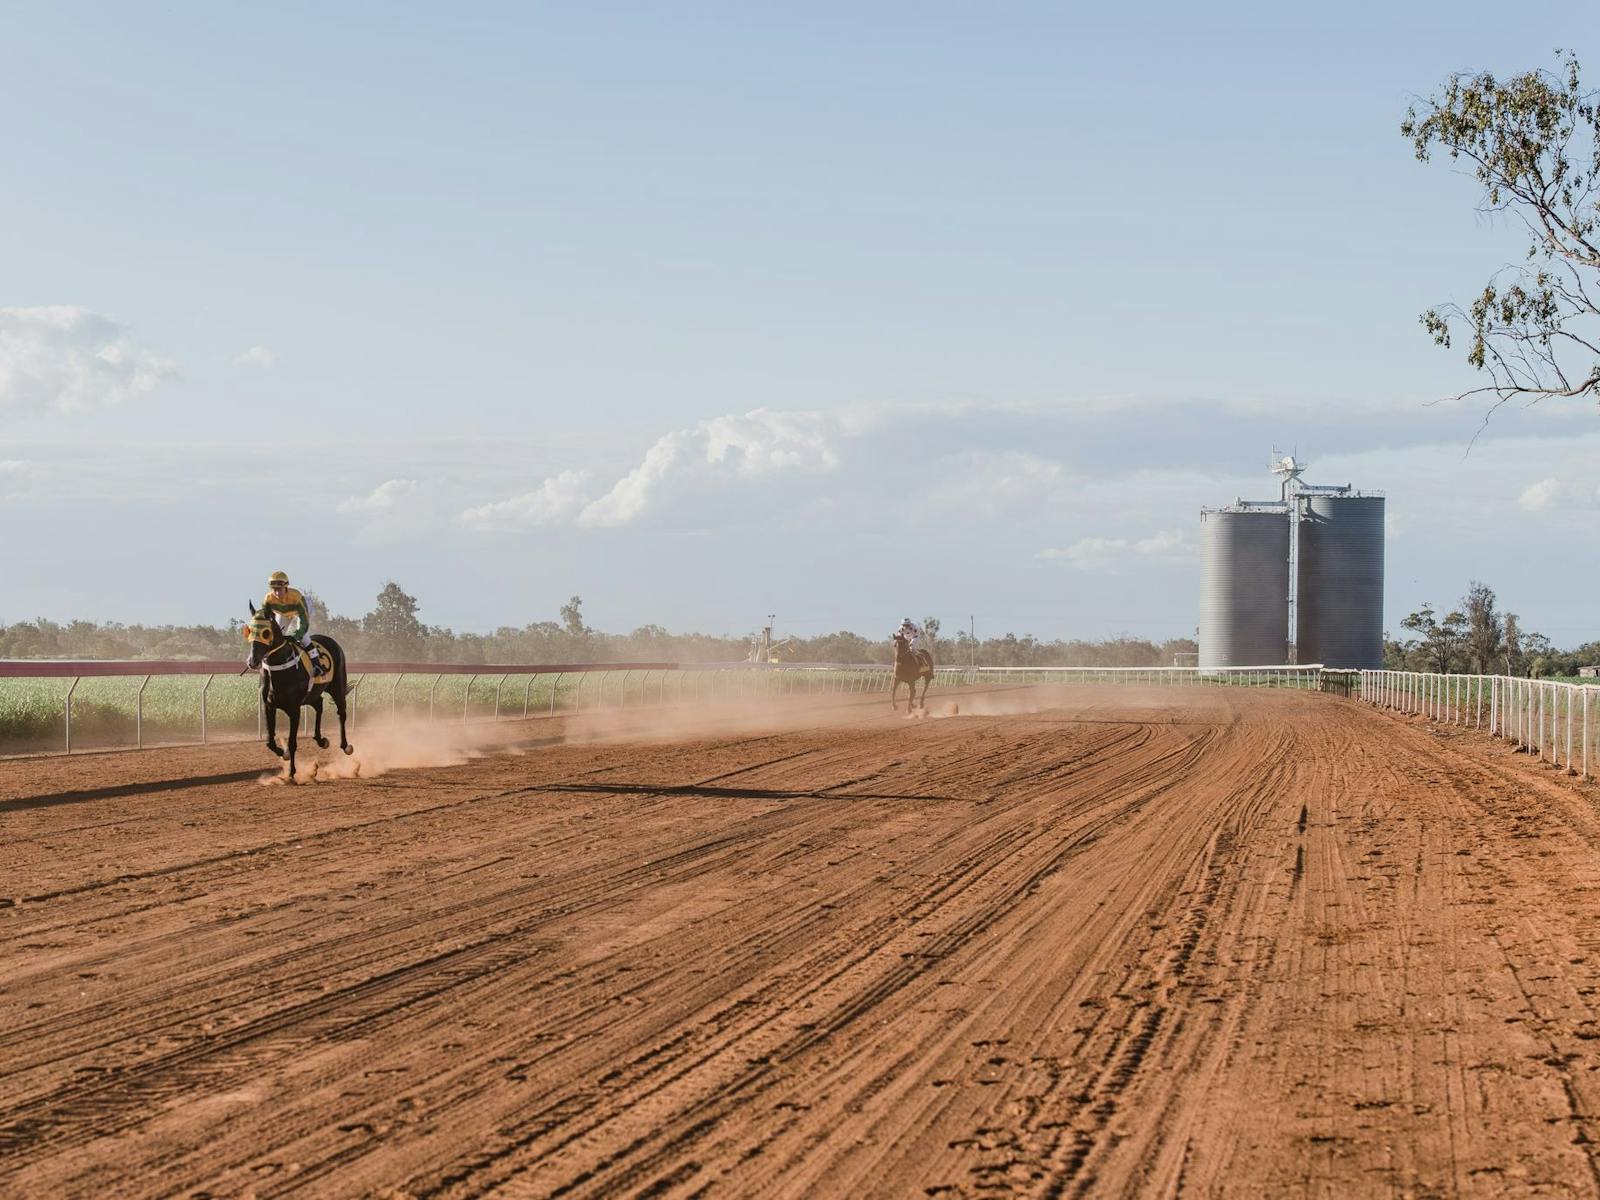 Red dirt racetrack with silos in the backgrond